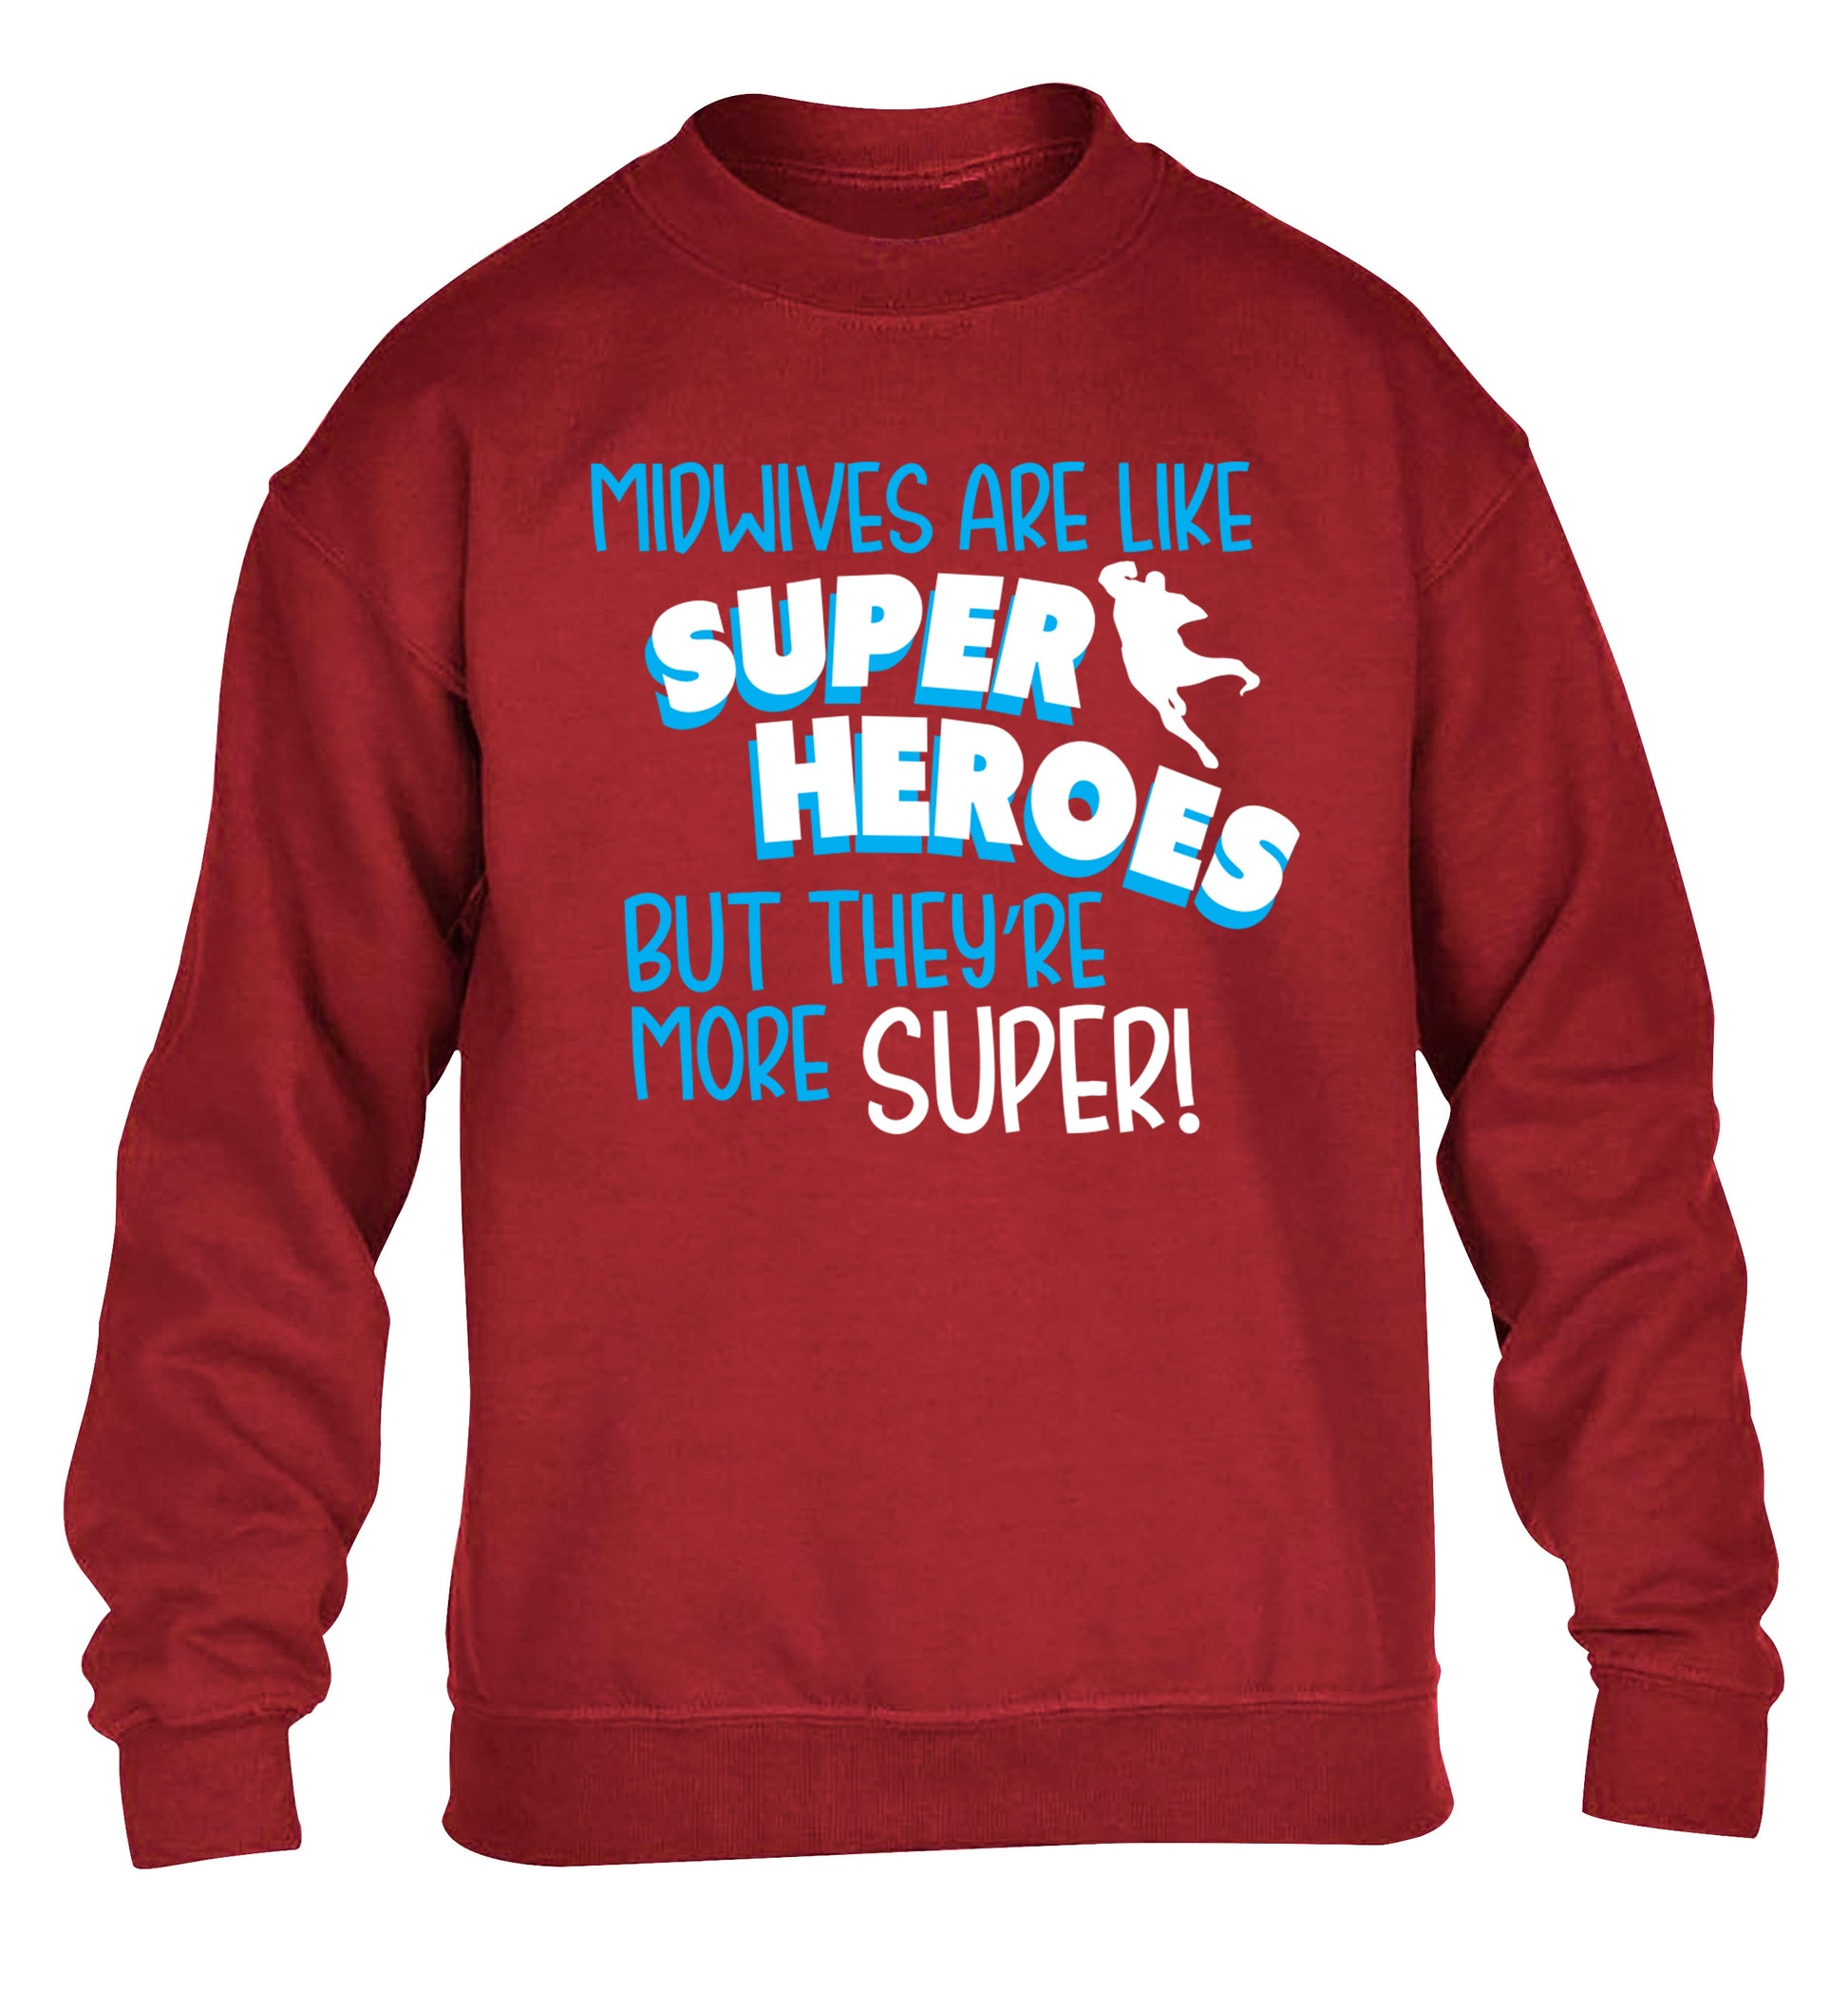 Midwives are like superheros but they're more super children's grey sweater 12-13 Years